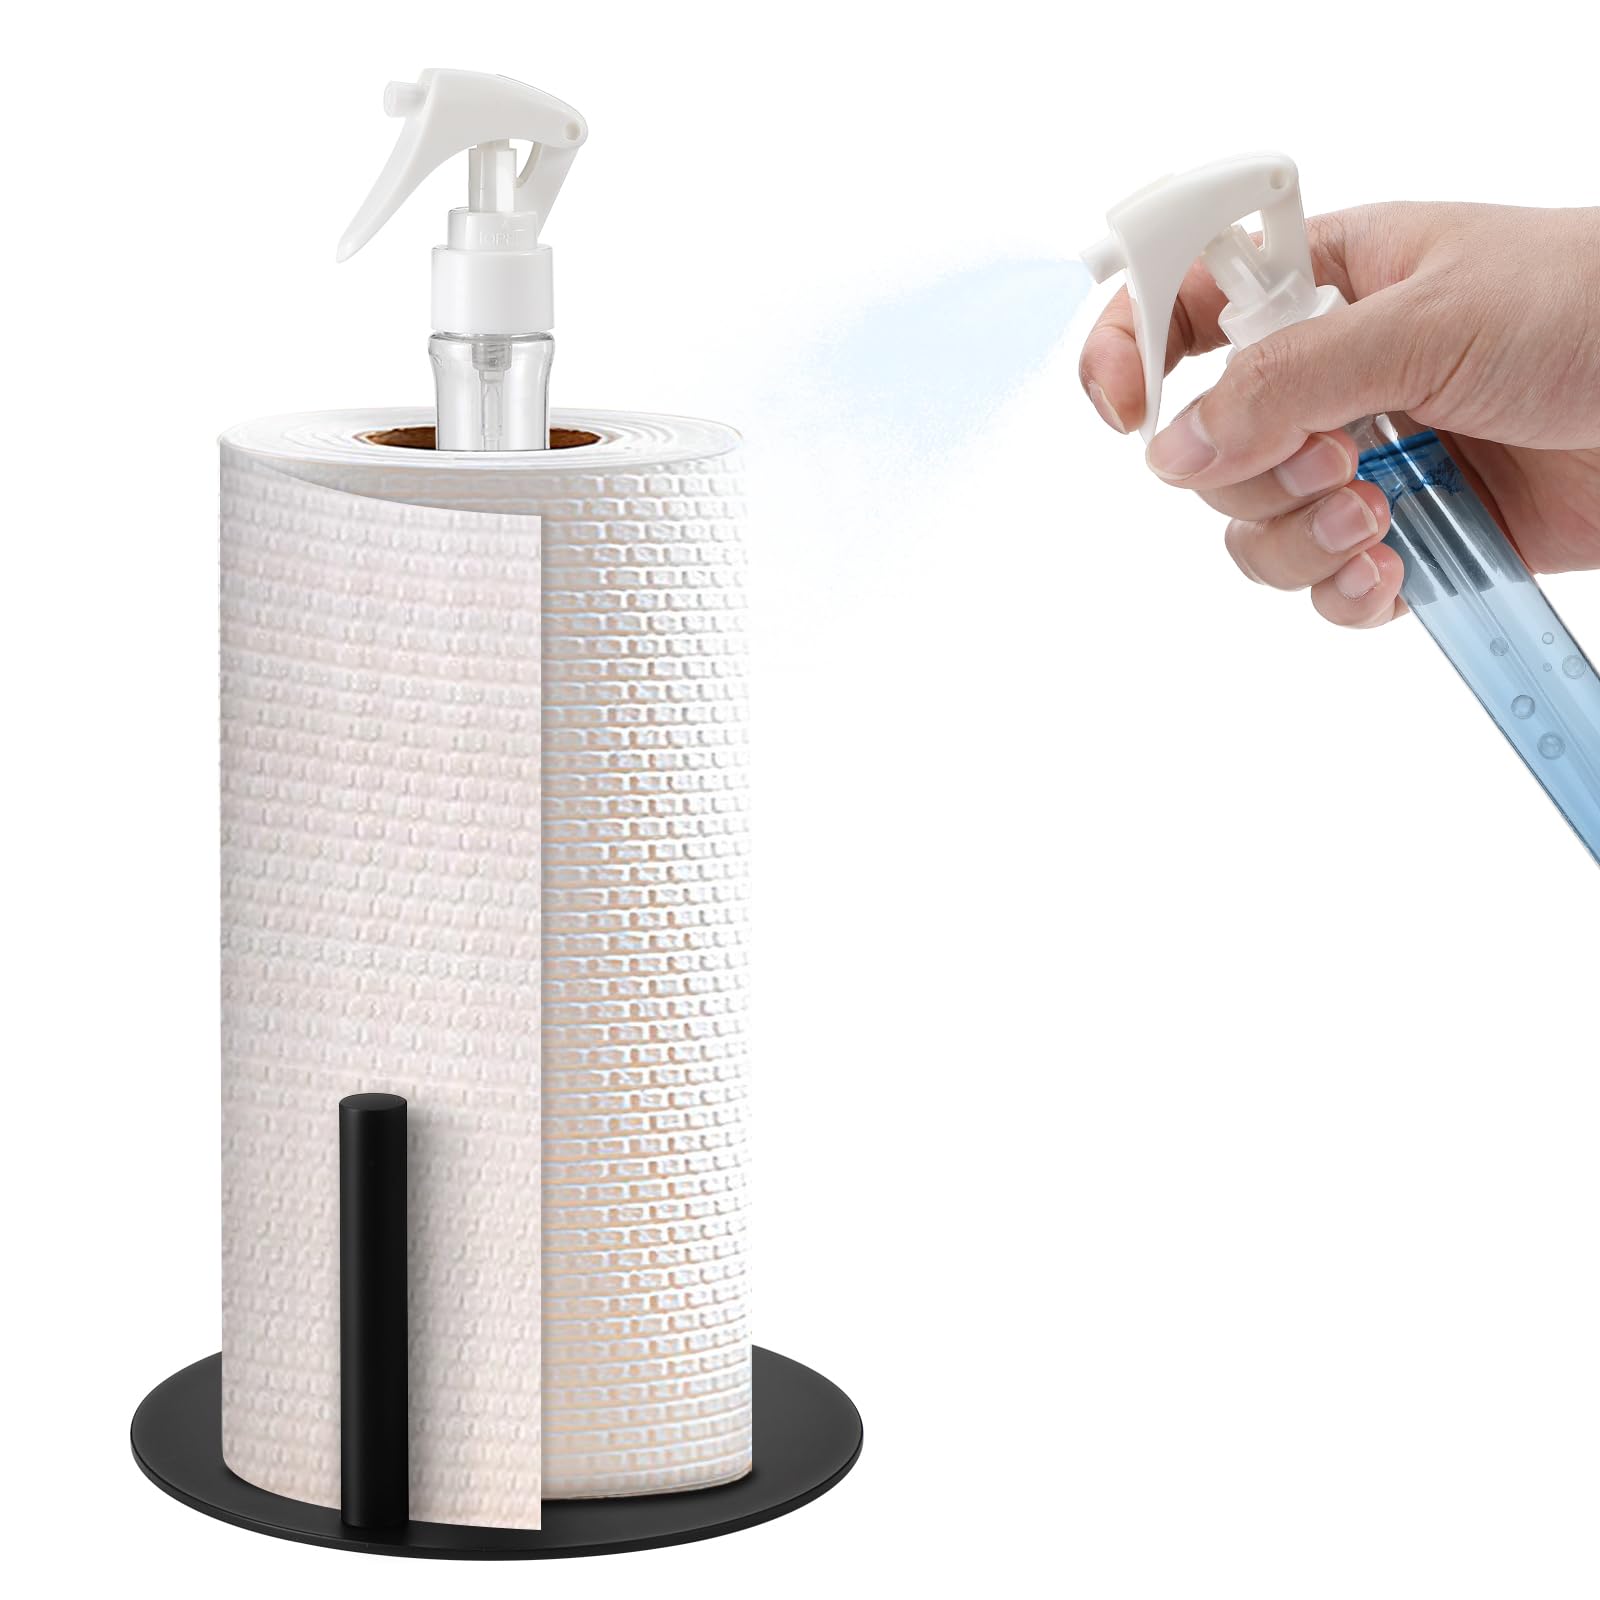 Ceuku Paper Towel Holder Countertop with Spray Bottle Paper Towel Stand with Weighted Base for Kitchen Bathroom, One-Handed Tear Stainless Steel Paper Towel Holder